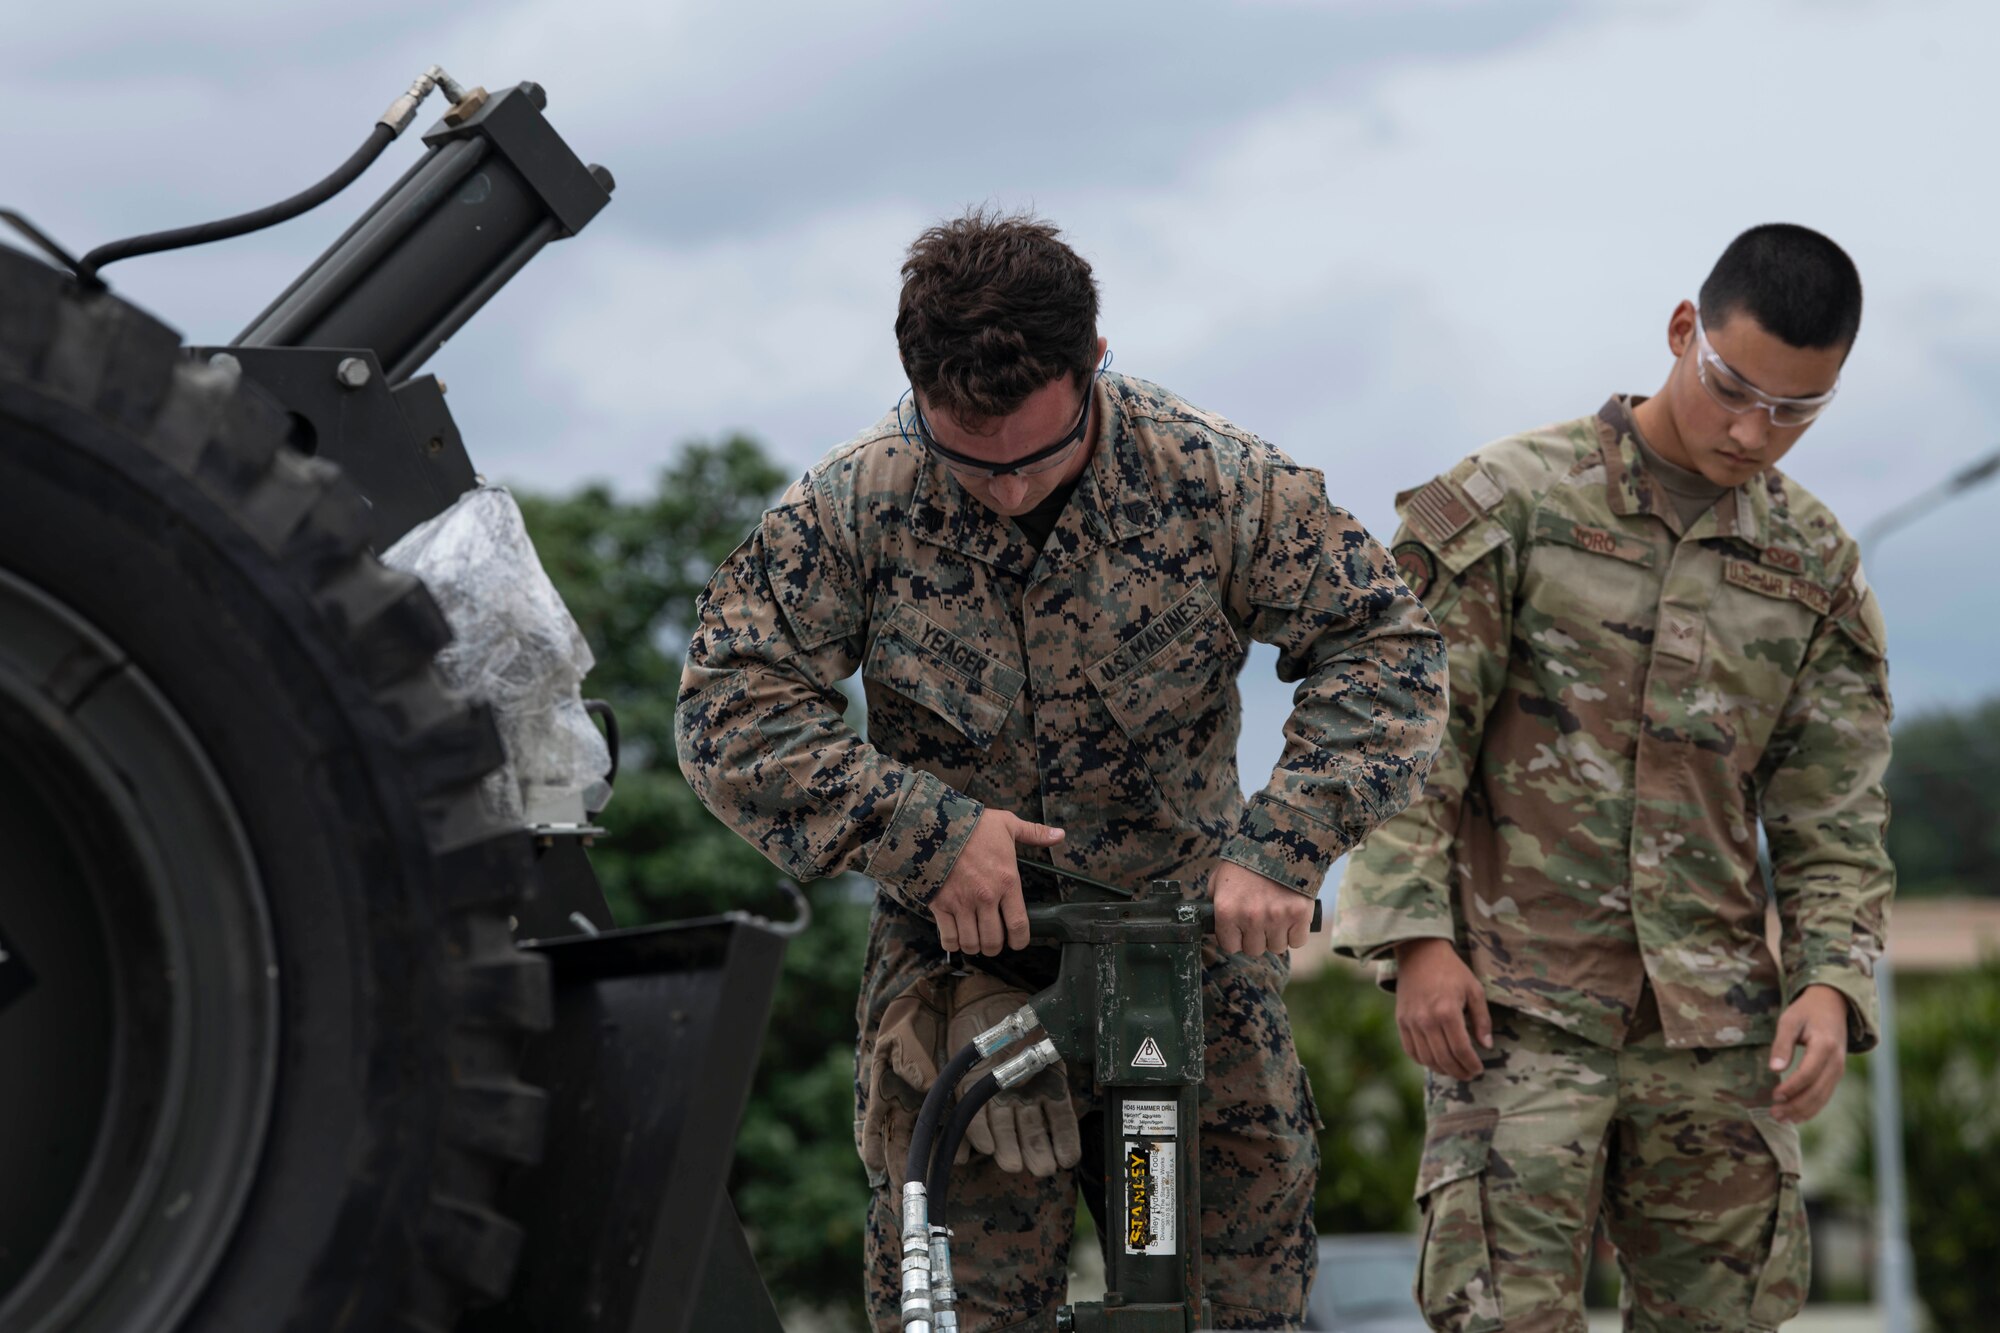 USAF and USMC members operate equipment together.